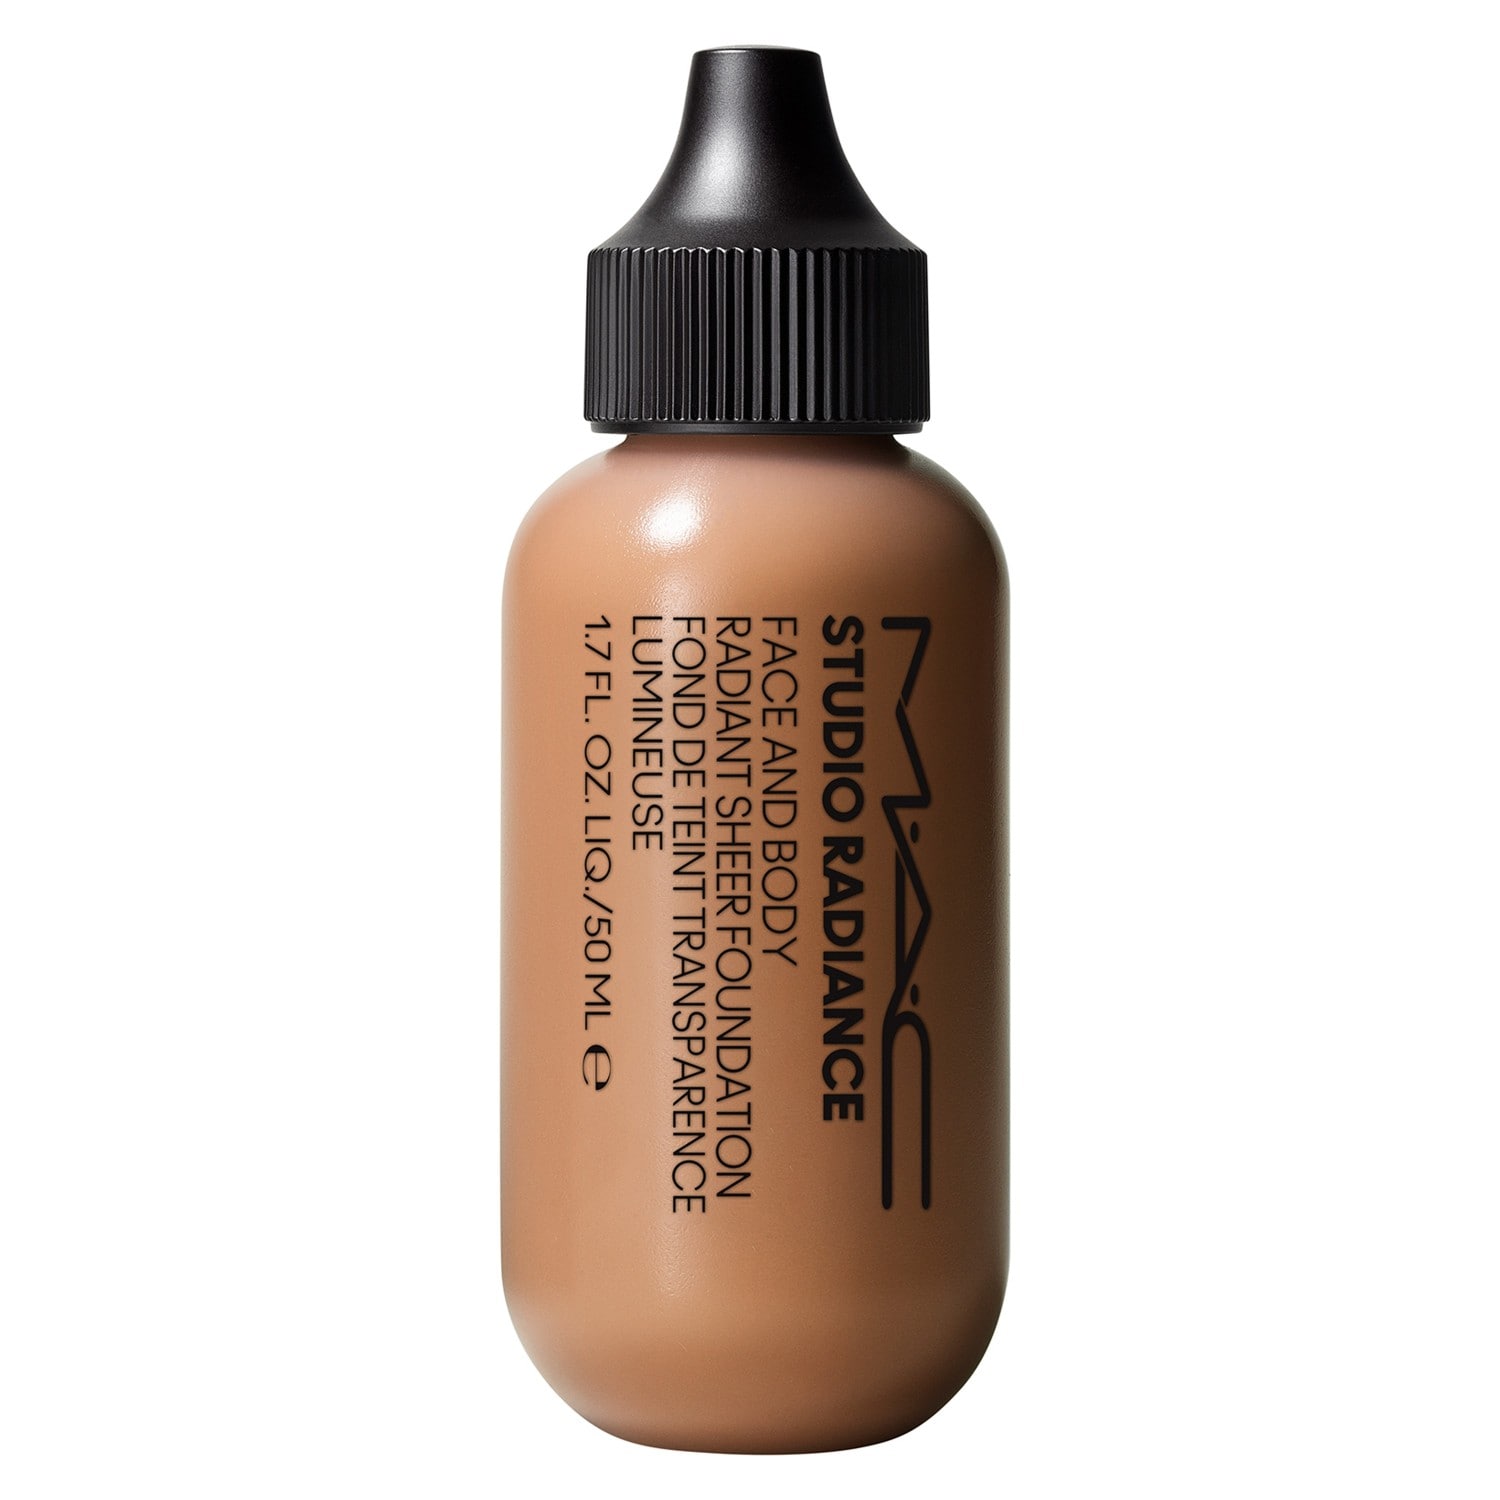 MAC Perfect Shot Studio Radiance Face and Body Radiant Sheer Foundation, C4